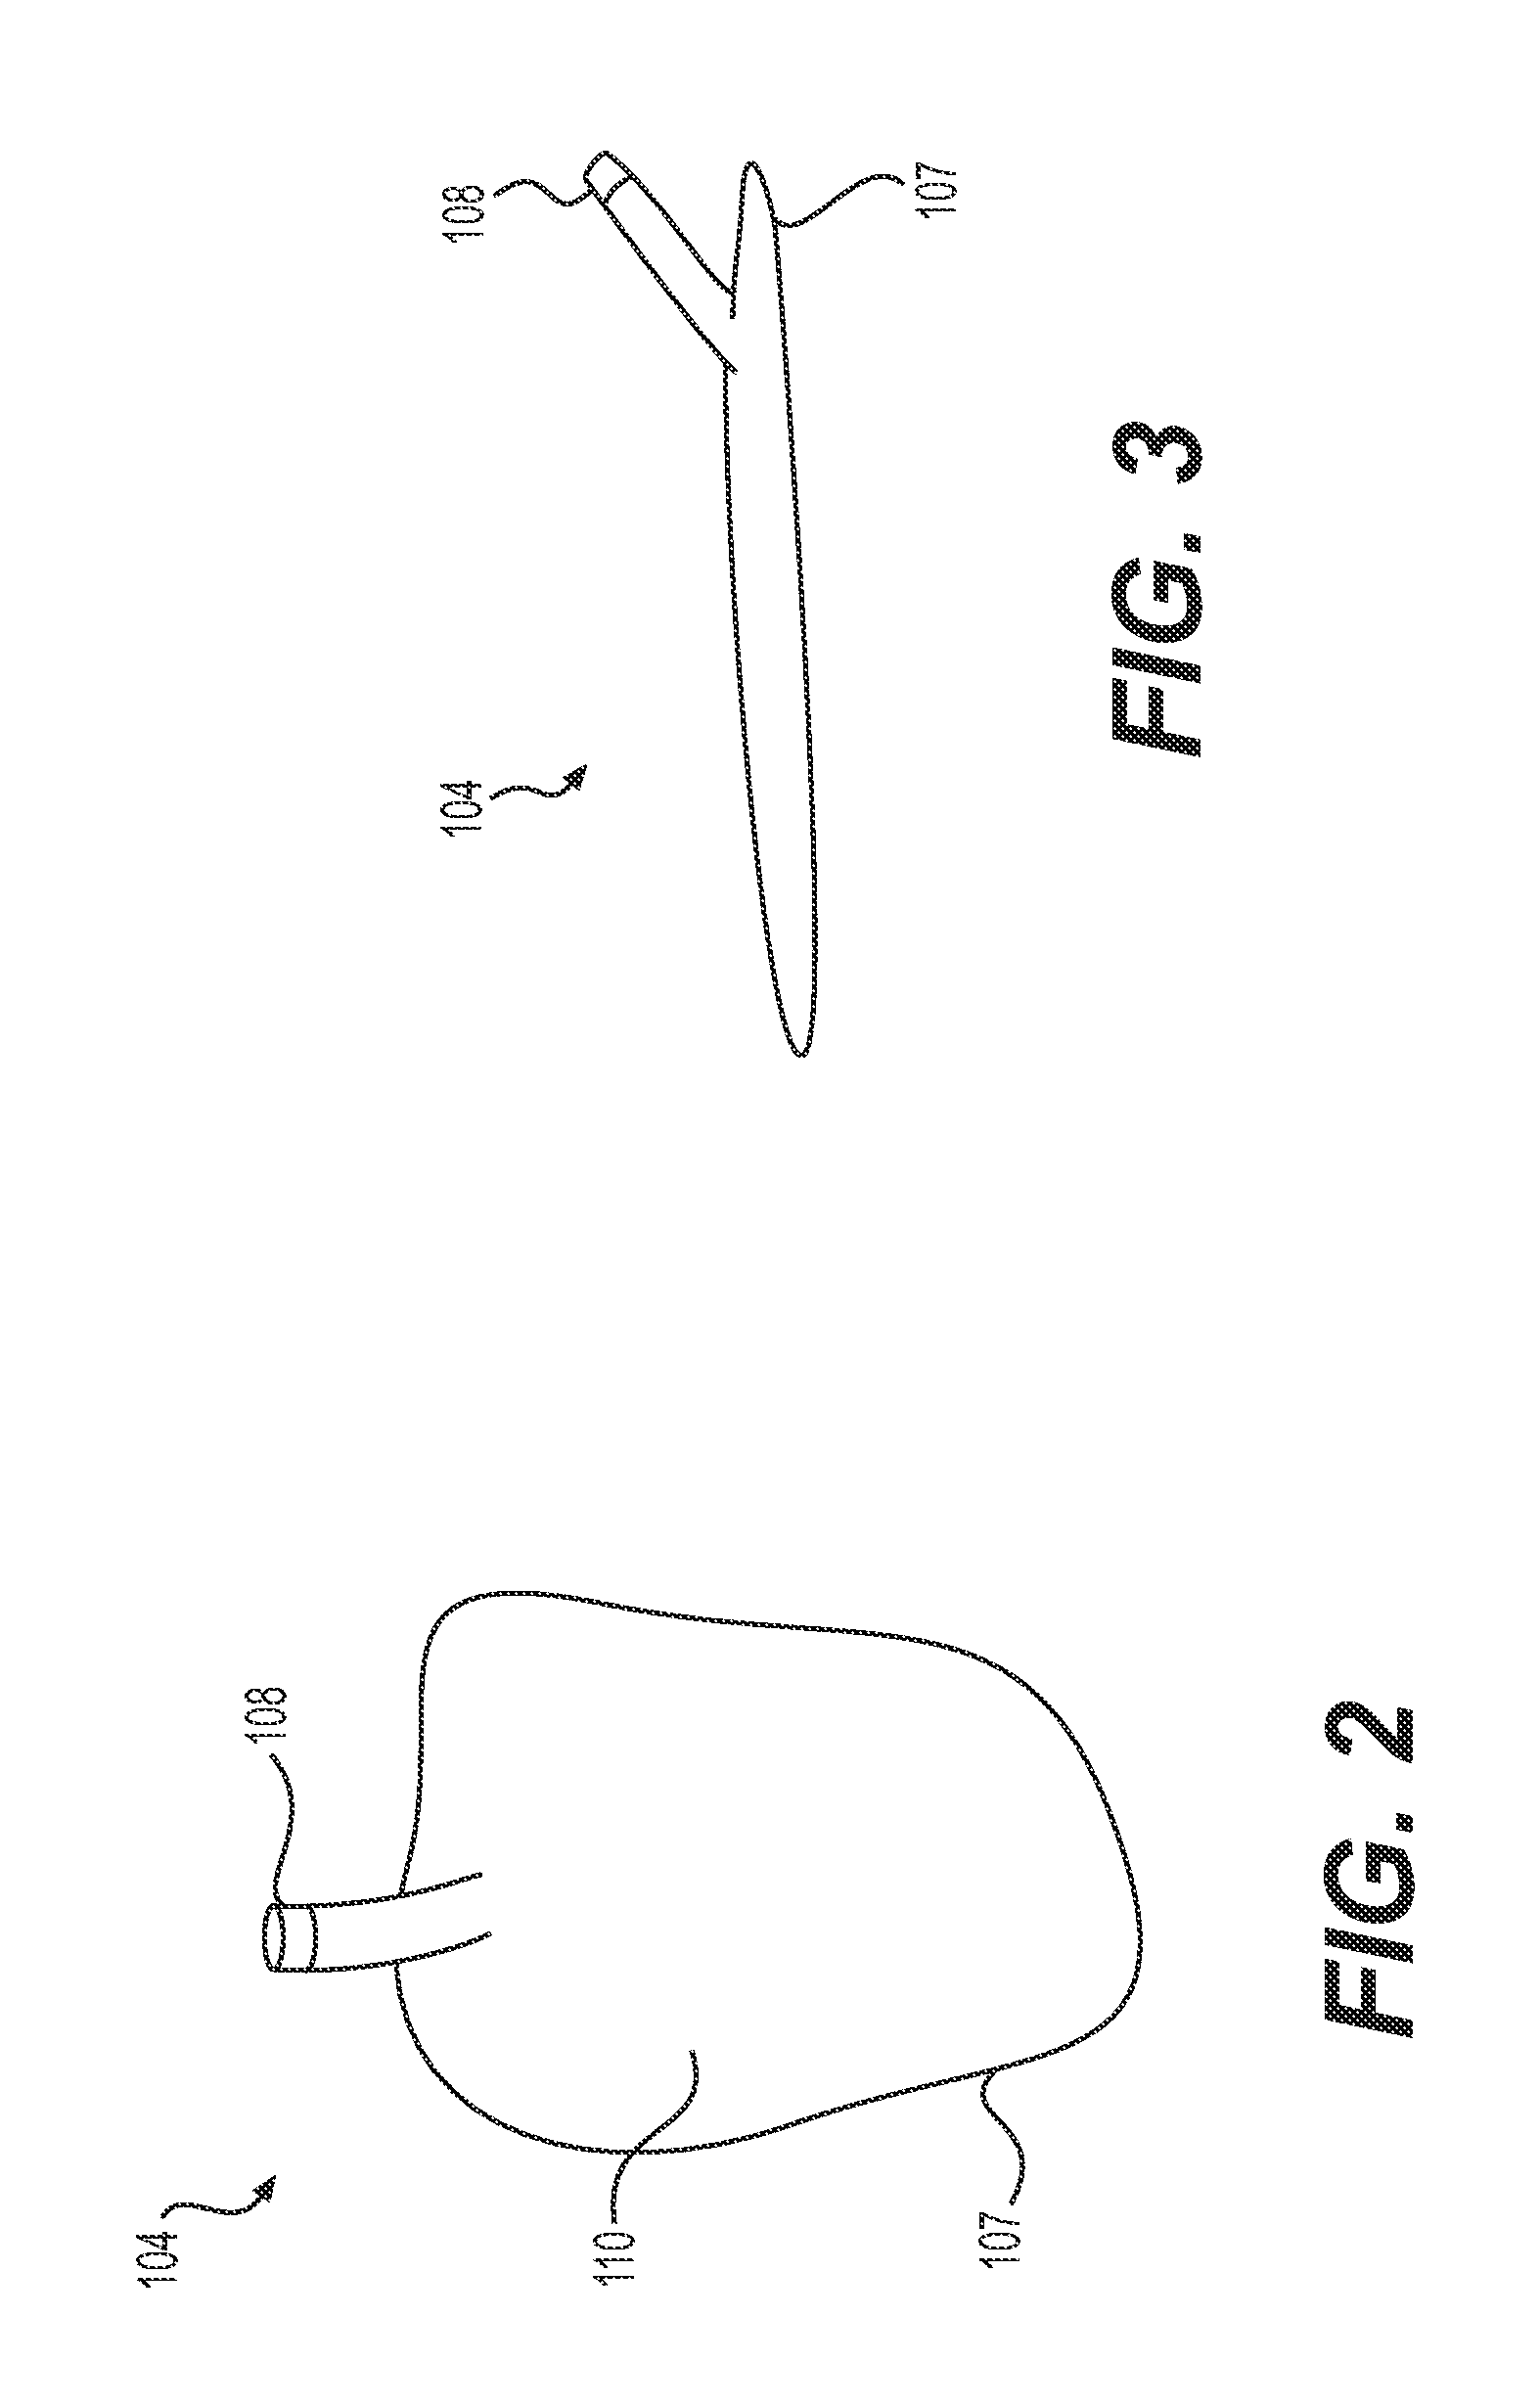 Devices for sizing a cavity to fit an organ and related methods of use